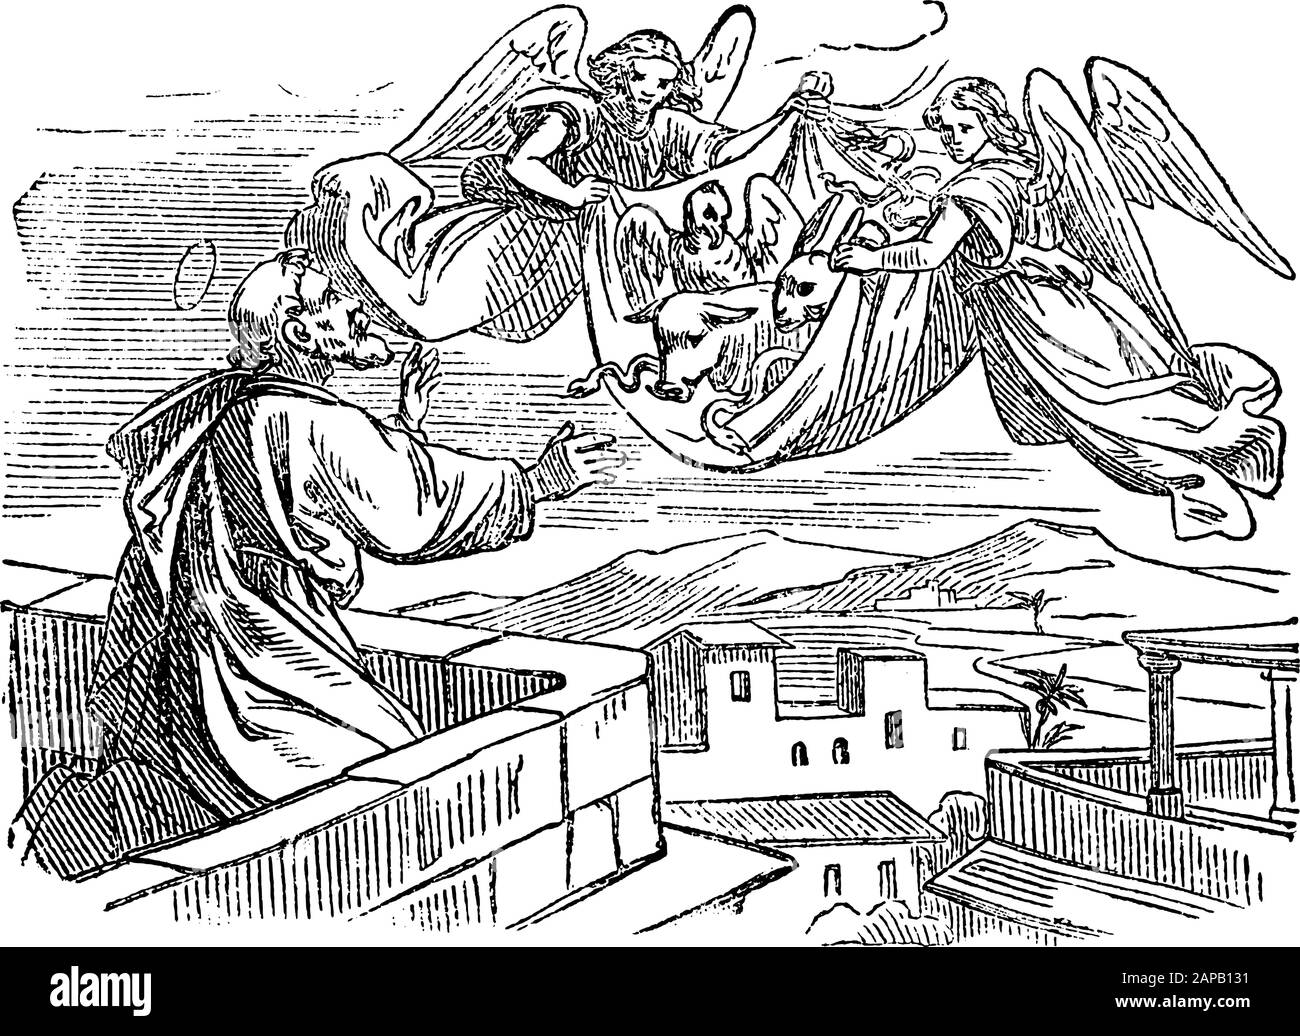 Antique vintage biblical religious engraving or drawing of story of vision of saint apostle Simon Peter and his vision of sheet with animals carried to be eaten.Bible, New Testament,Acts 10. Biblische Geschichte , Germany 1859. Stock Vector